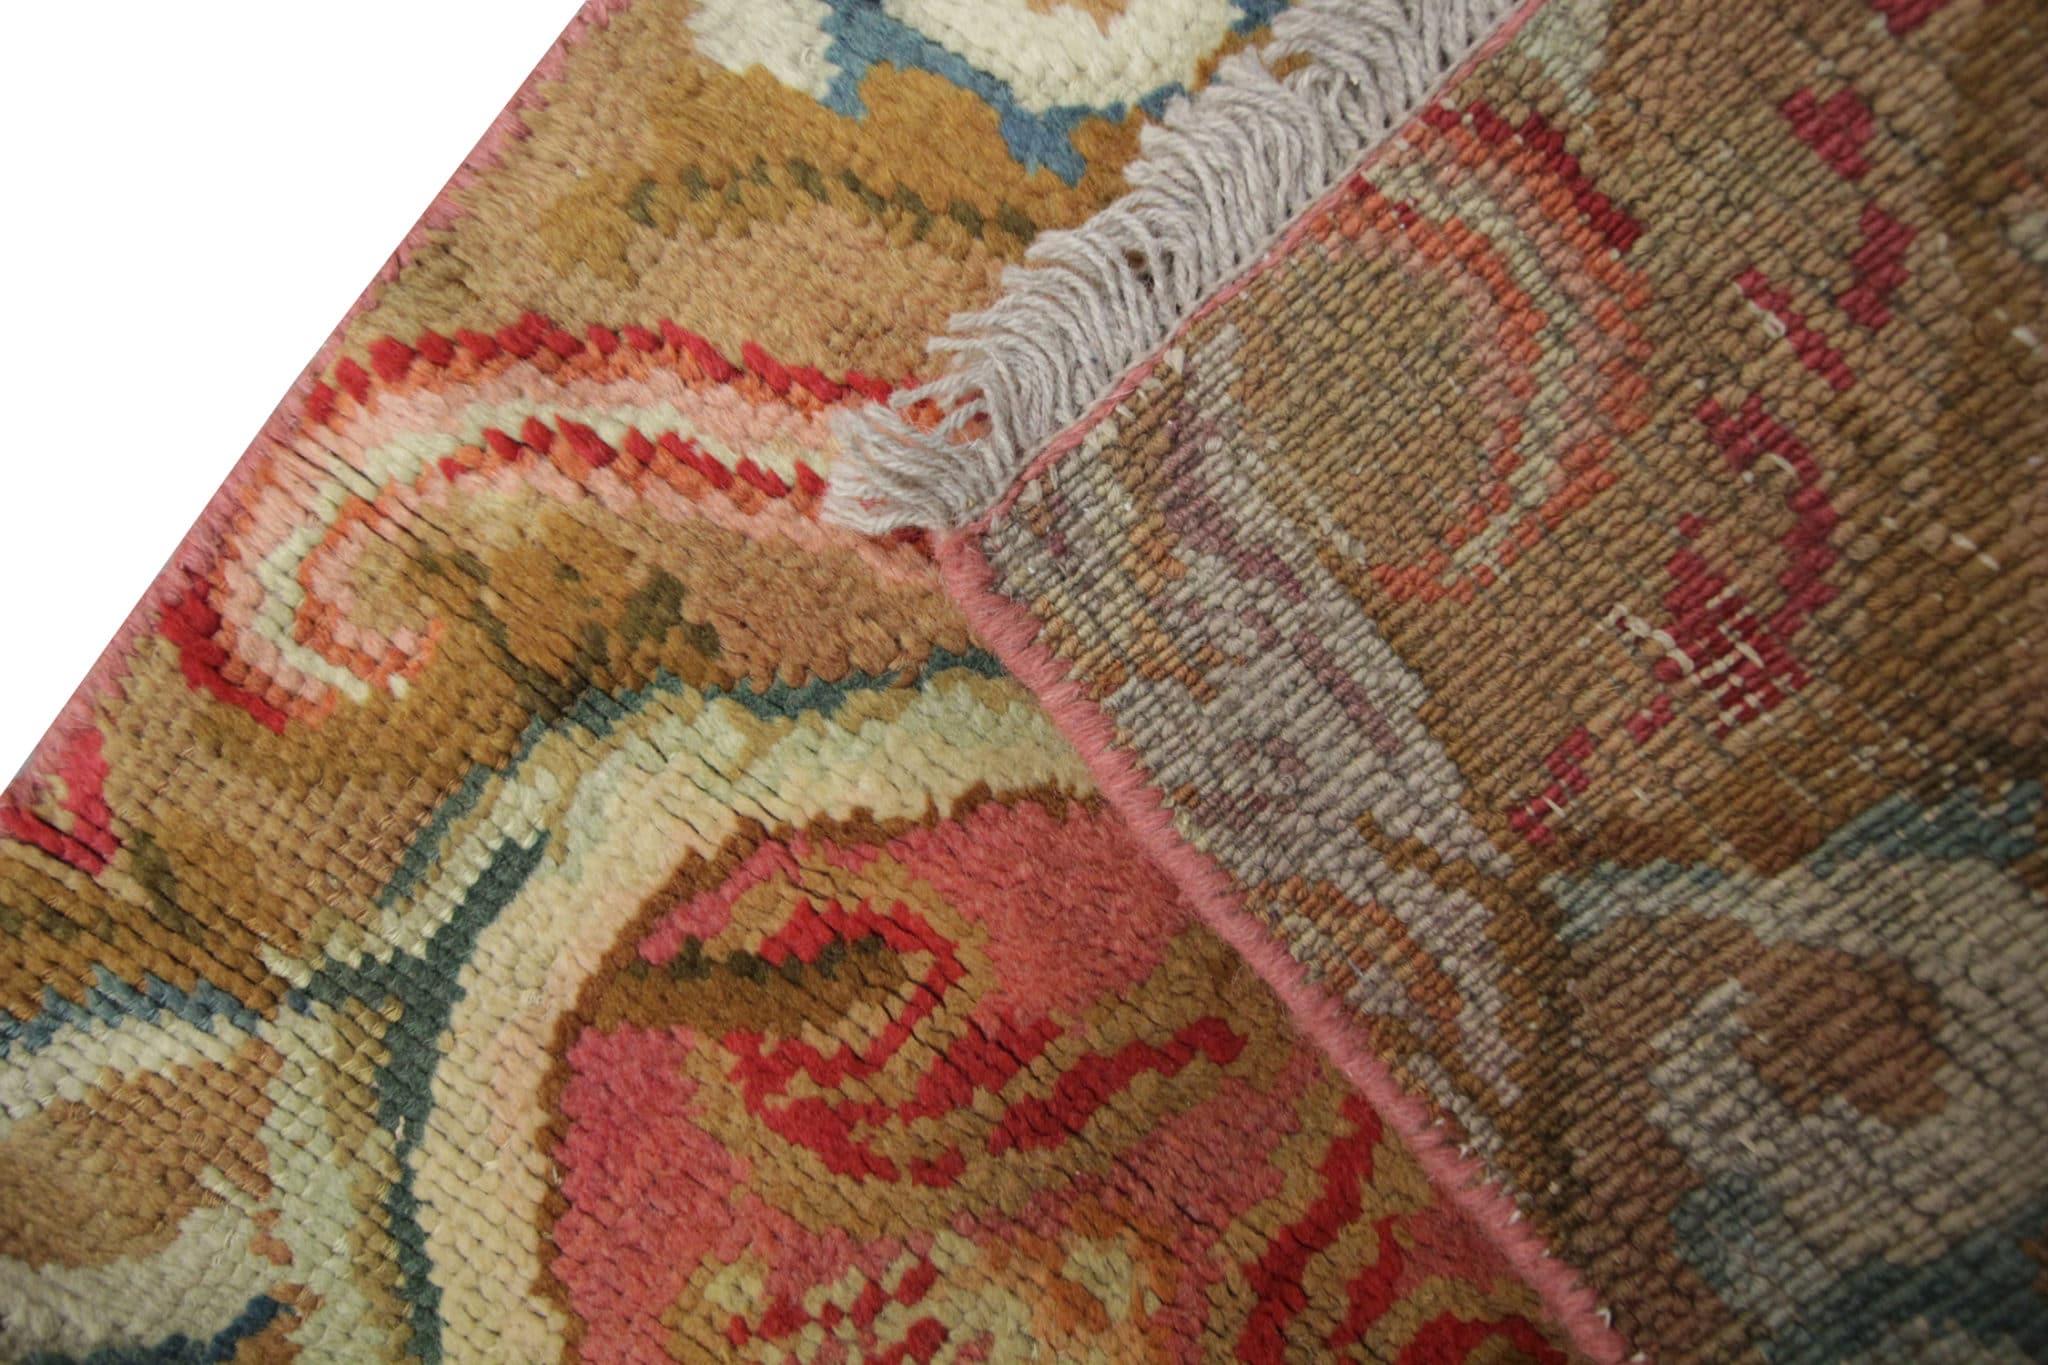 Step into the rich history of British craftsmanship with our rare antique rug english Axminster handmade runner. This exquisite piece, dating back to the 1870s, carries the legacy of traditional English rug making. Hand-knotted with meticulous care,